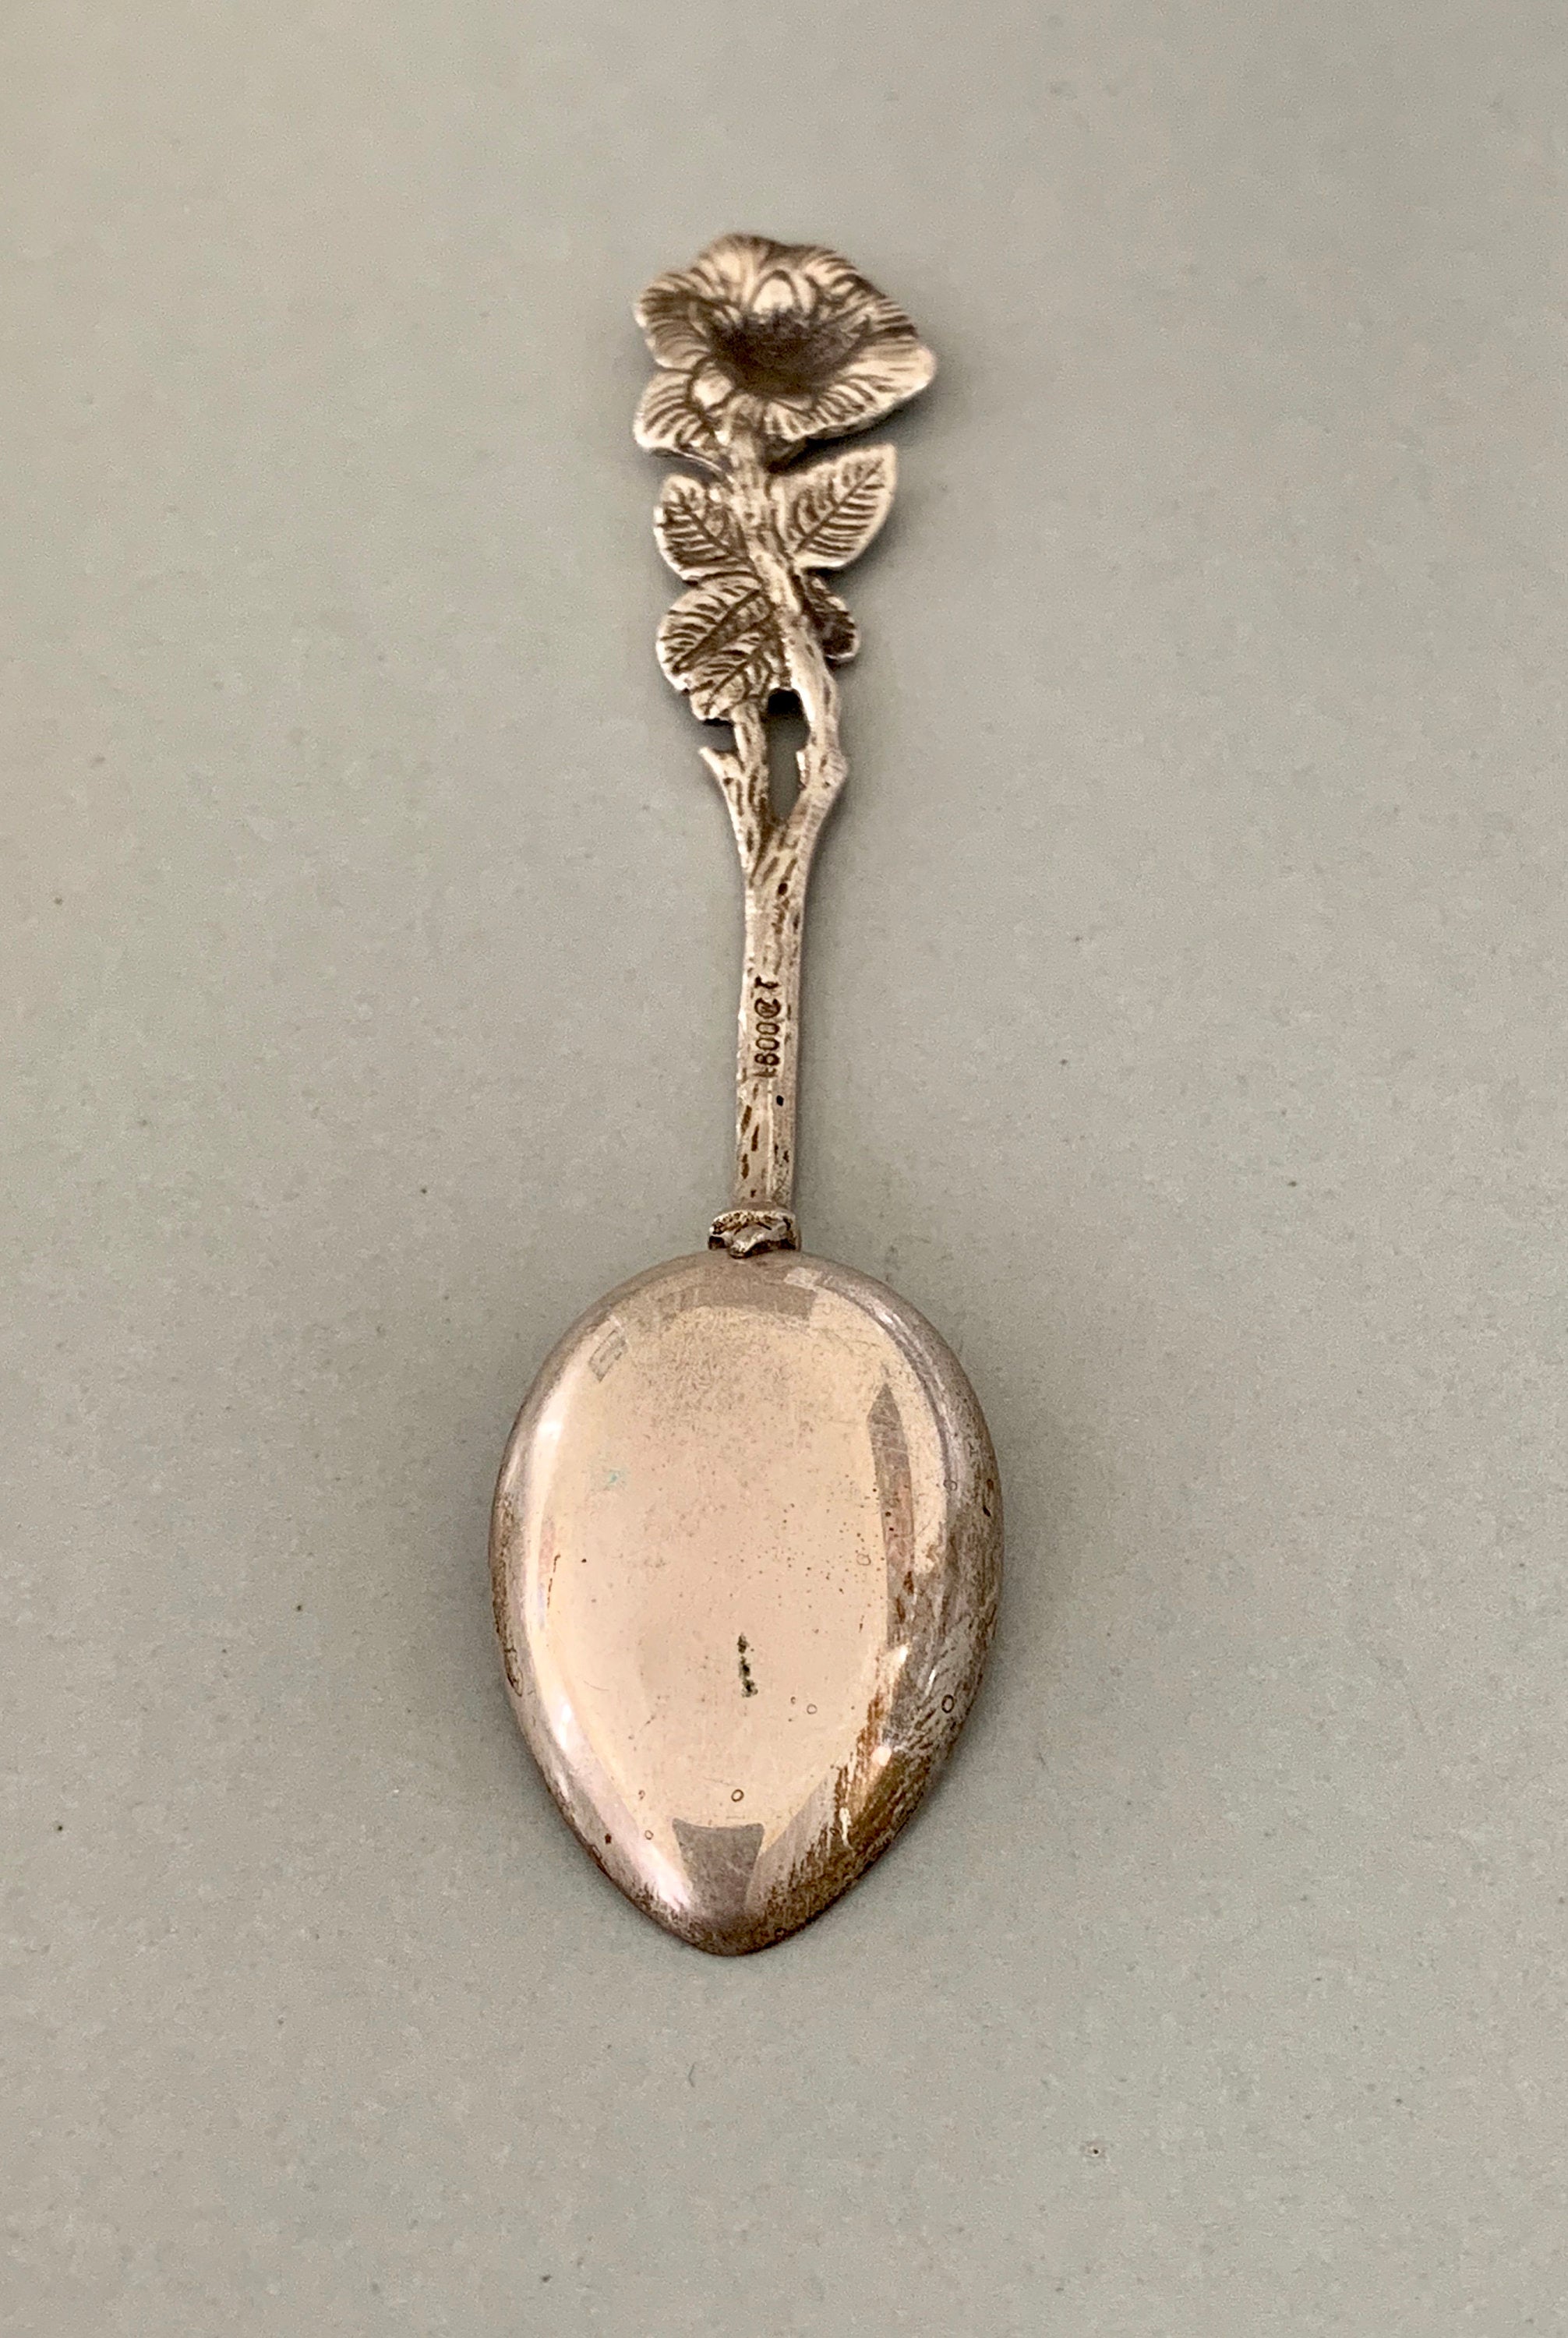 Watrous MFG Co. Sterling Silver Antique "Rose" Spoon Vintage Flatware, Collectible